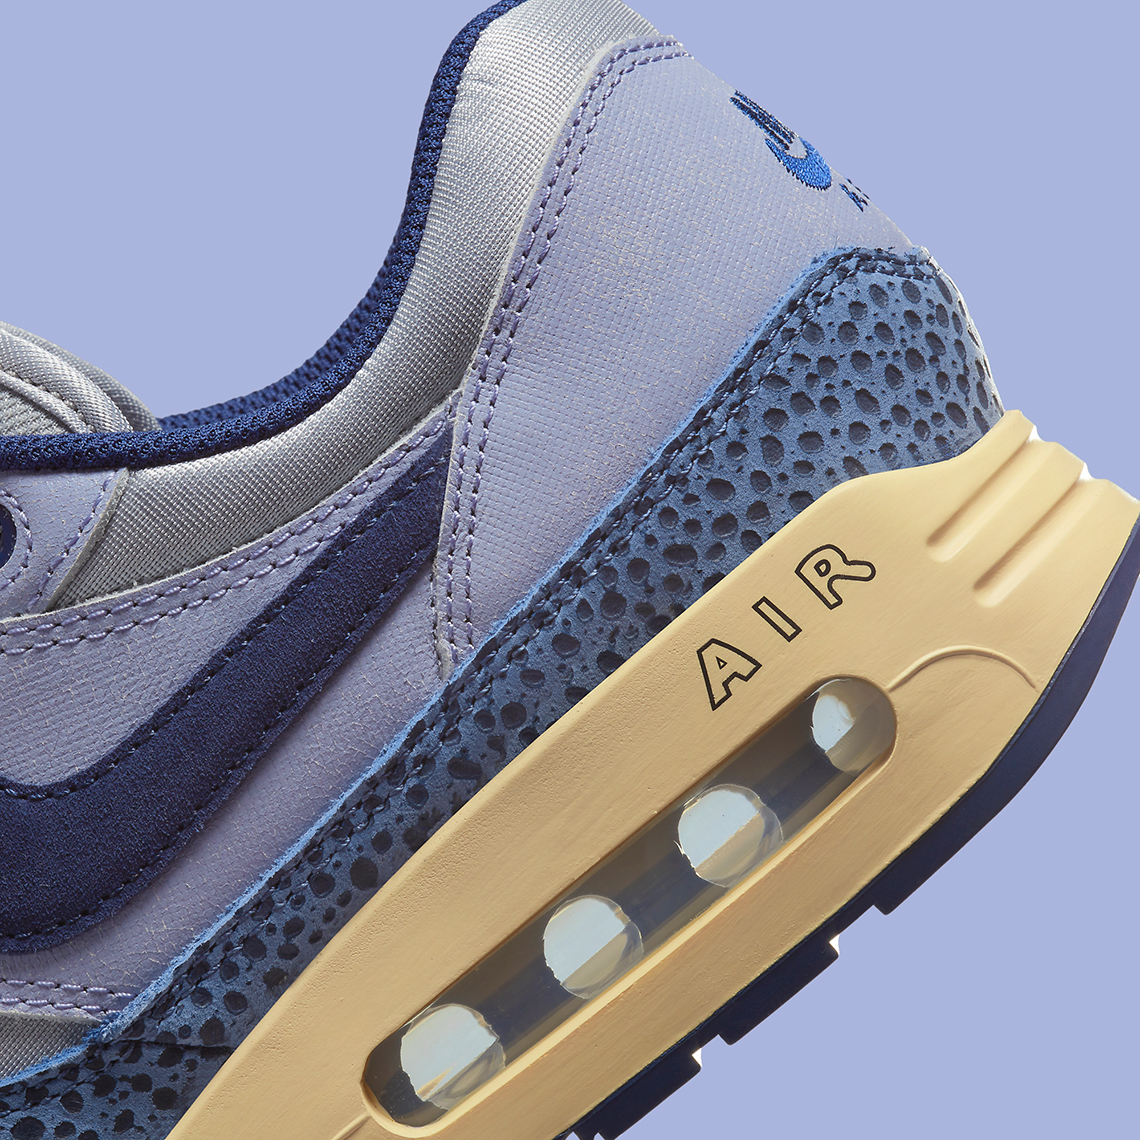 Light Navy Blue' Nike Air Max 1 'Big Bubble' Limited to 1,986 Pairs